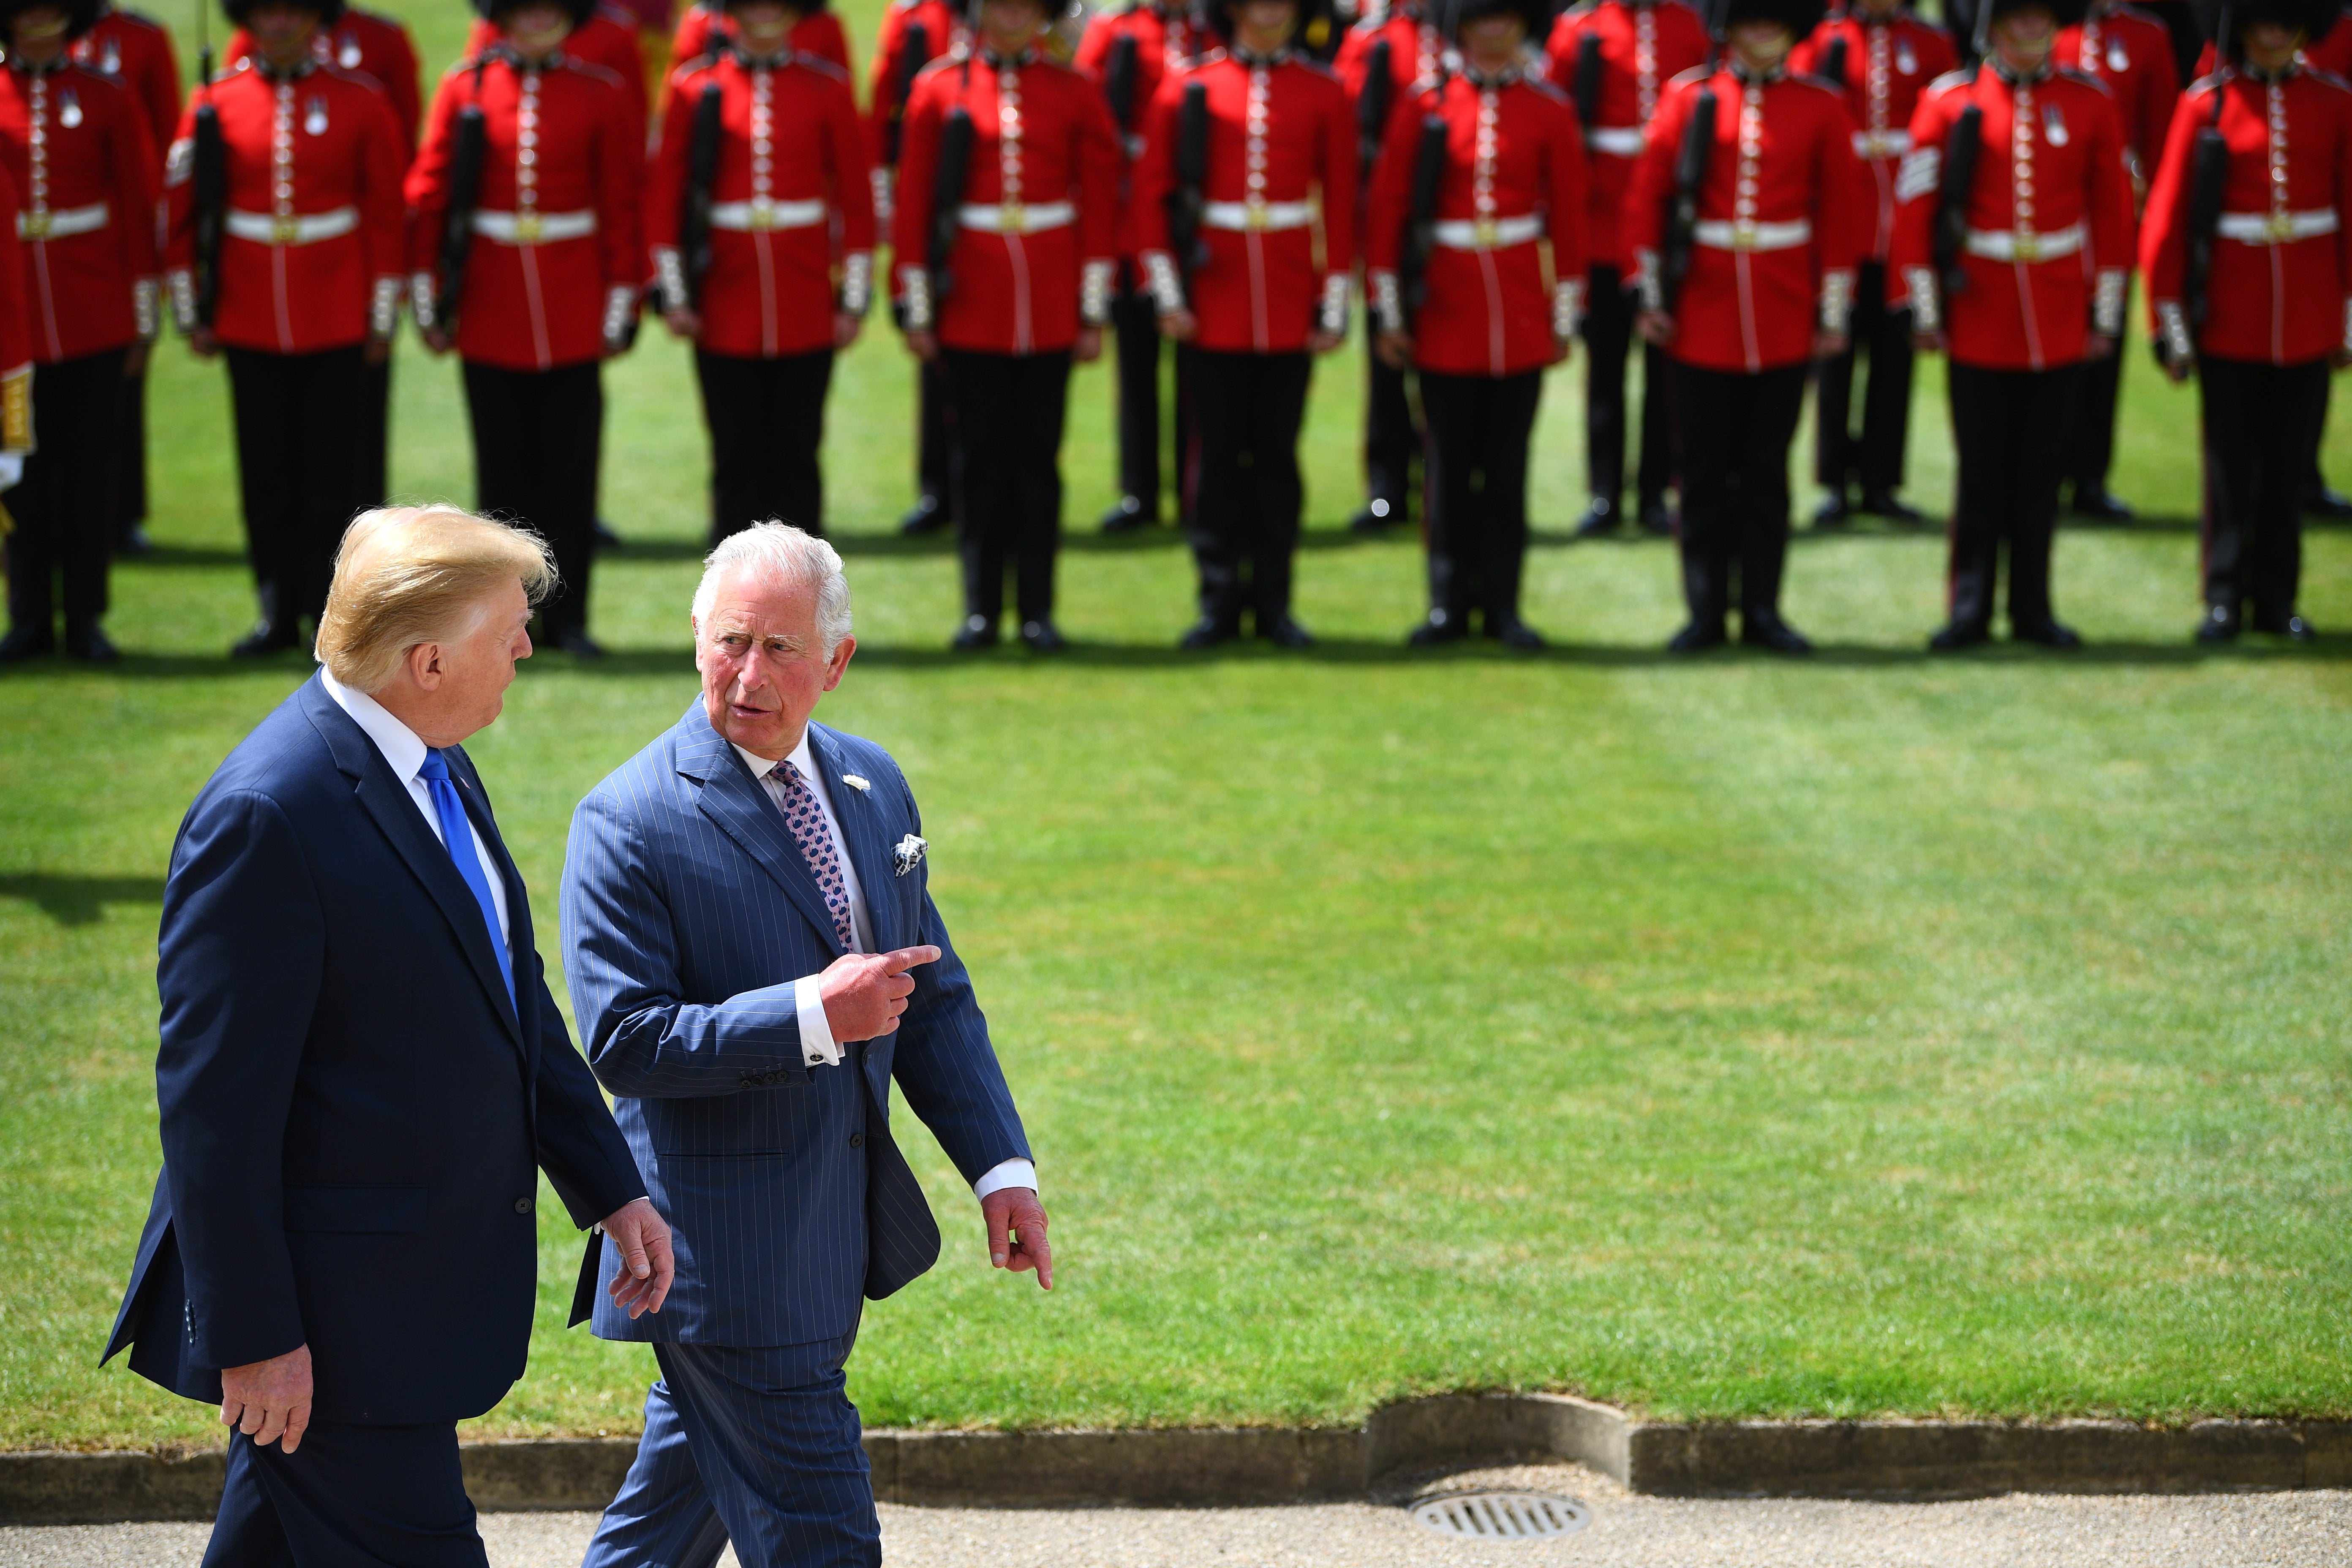 Prince Charles with Donald Trump at Buckingham Palace in June 2019 on the first day of the US president’s state visit to the UK